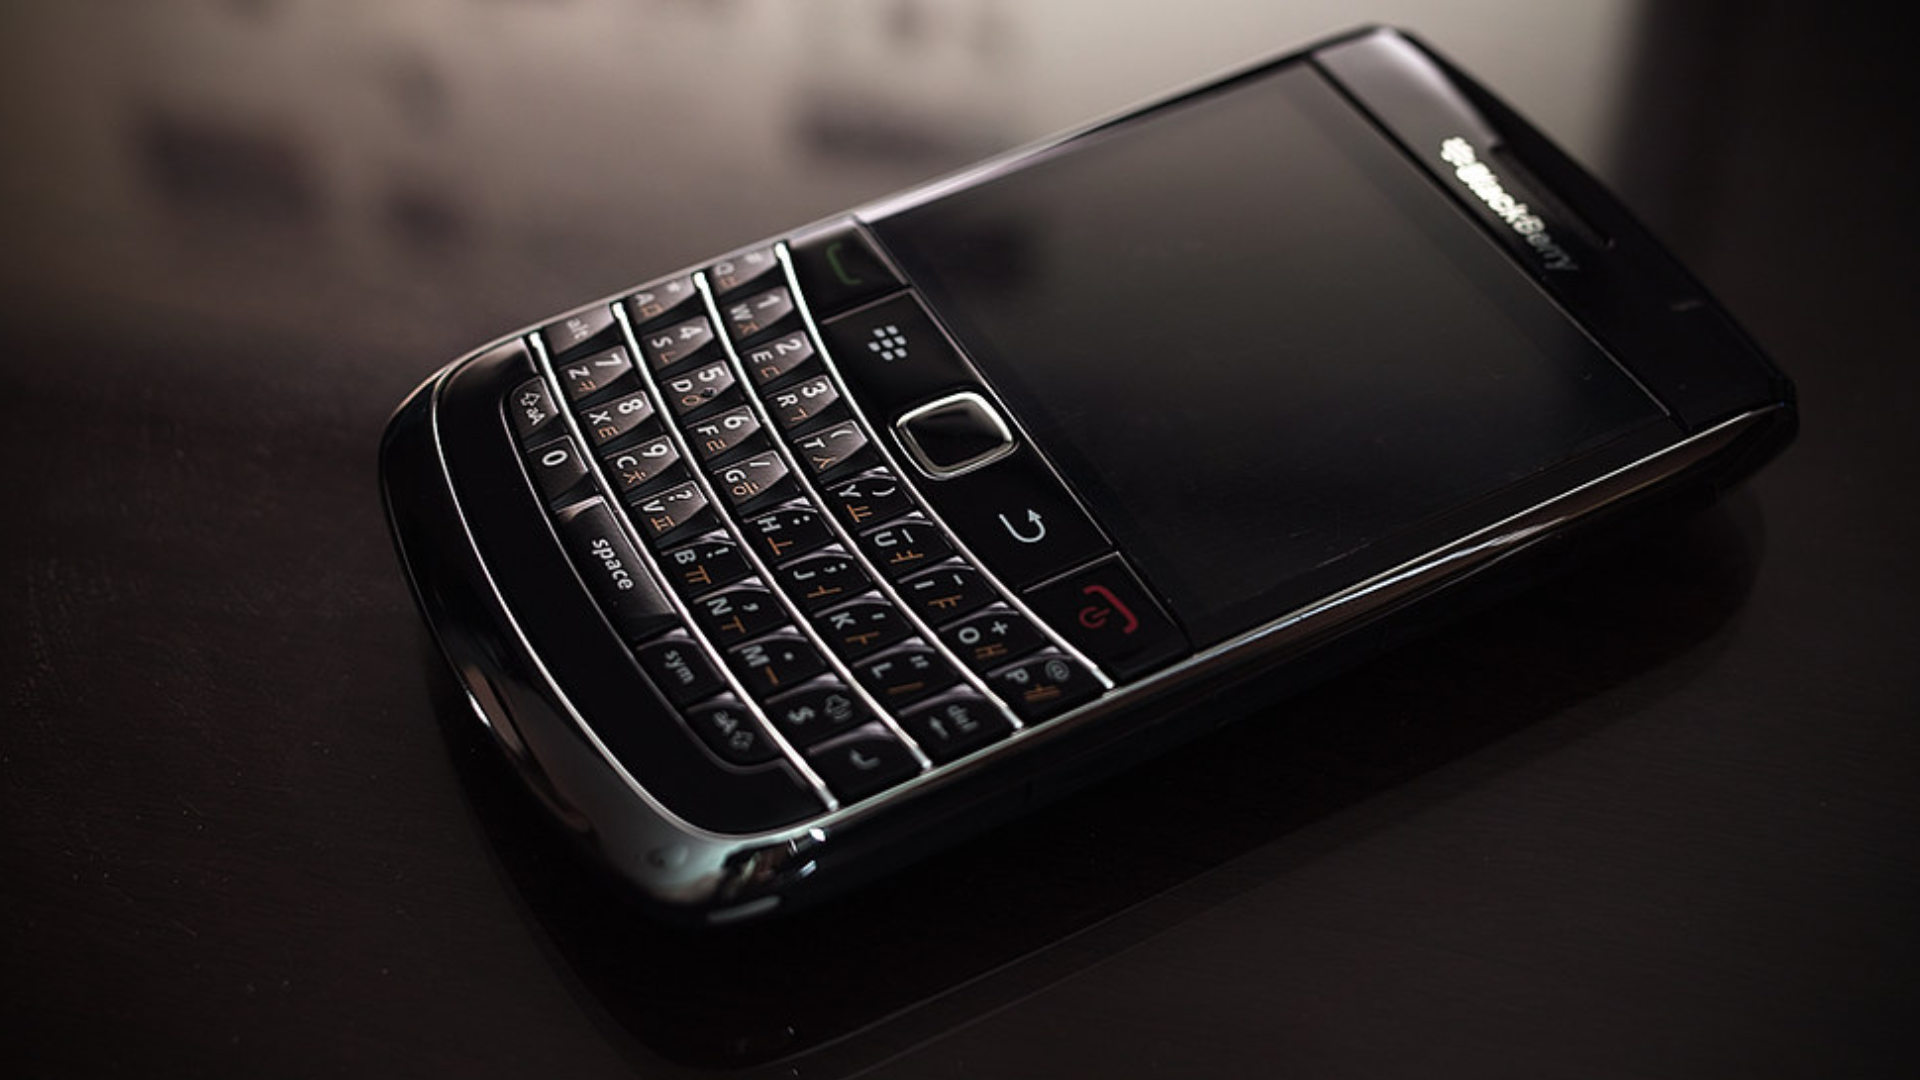  Are there still BlackBerry fans?  We'll never know, the brand won't come back

